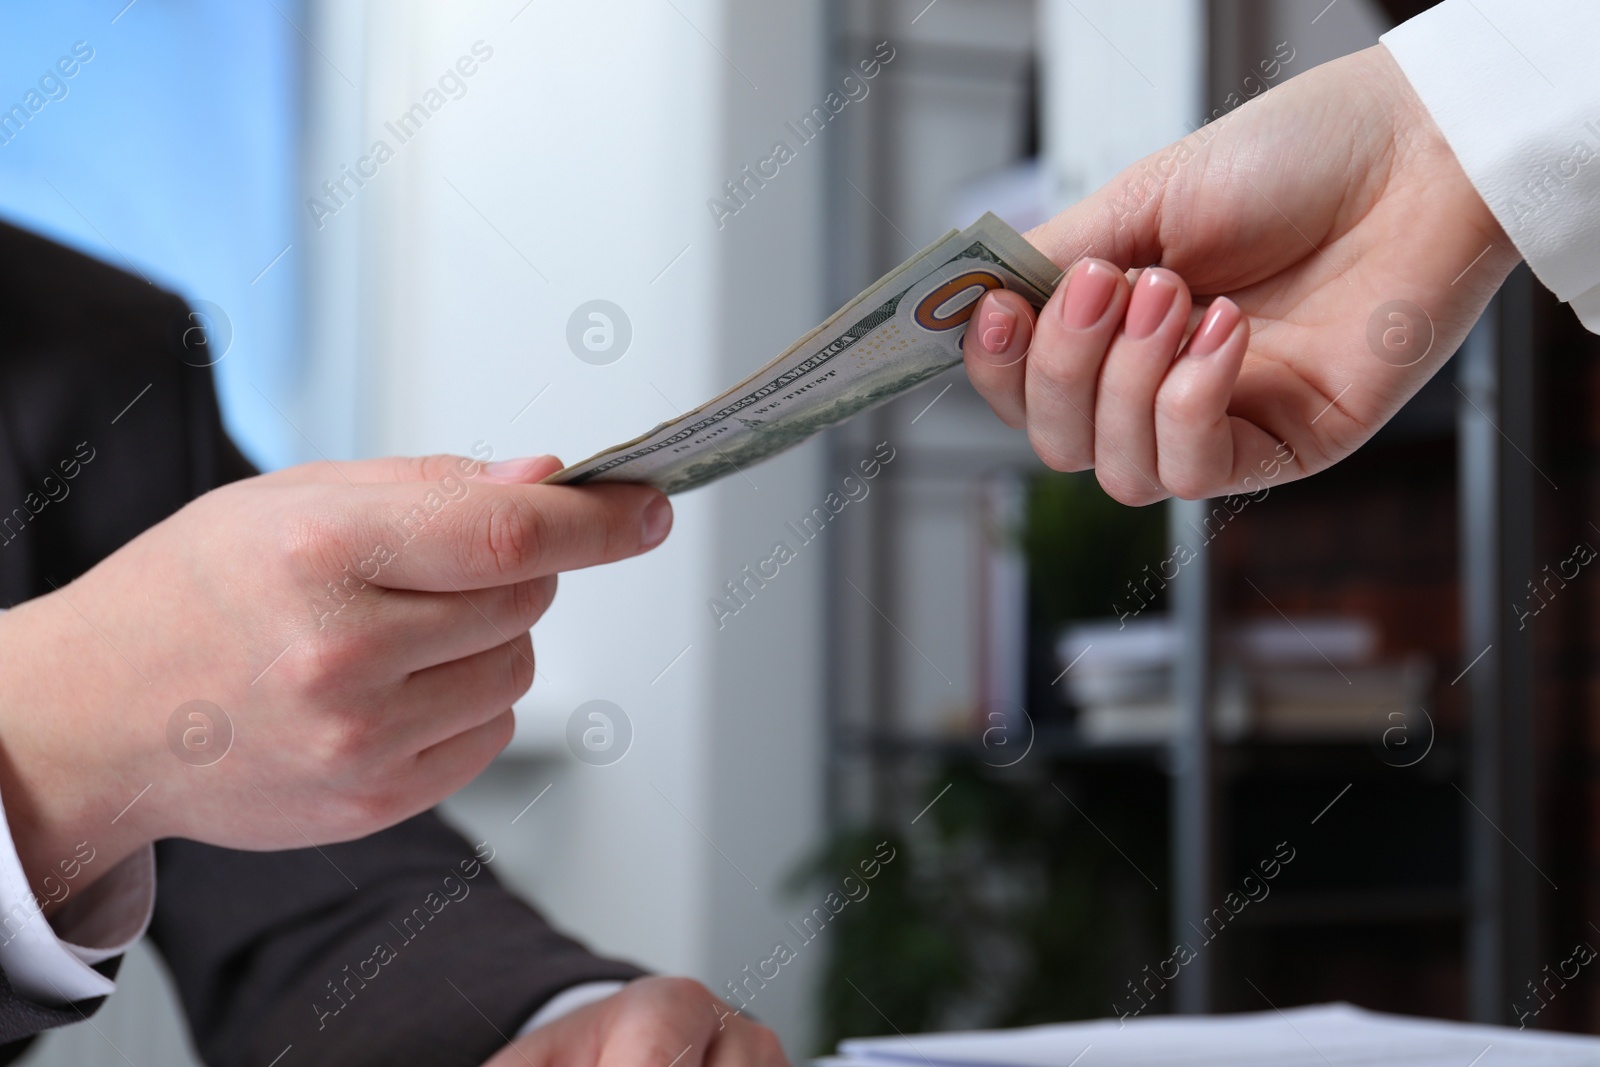 Photo of Man giving money to woman indoors, closeup. Currency exchange